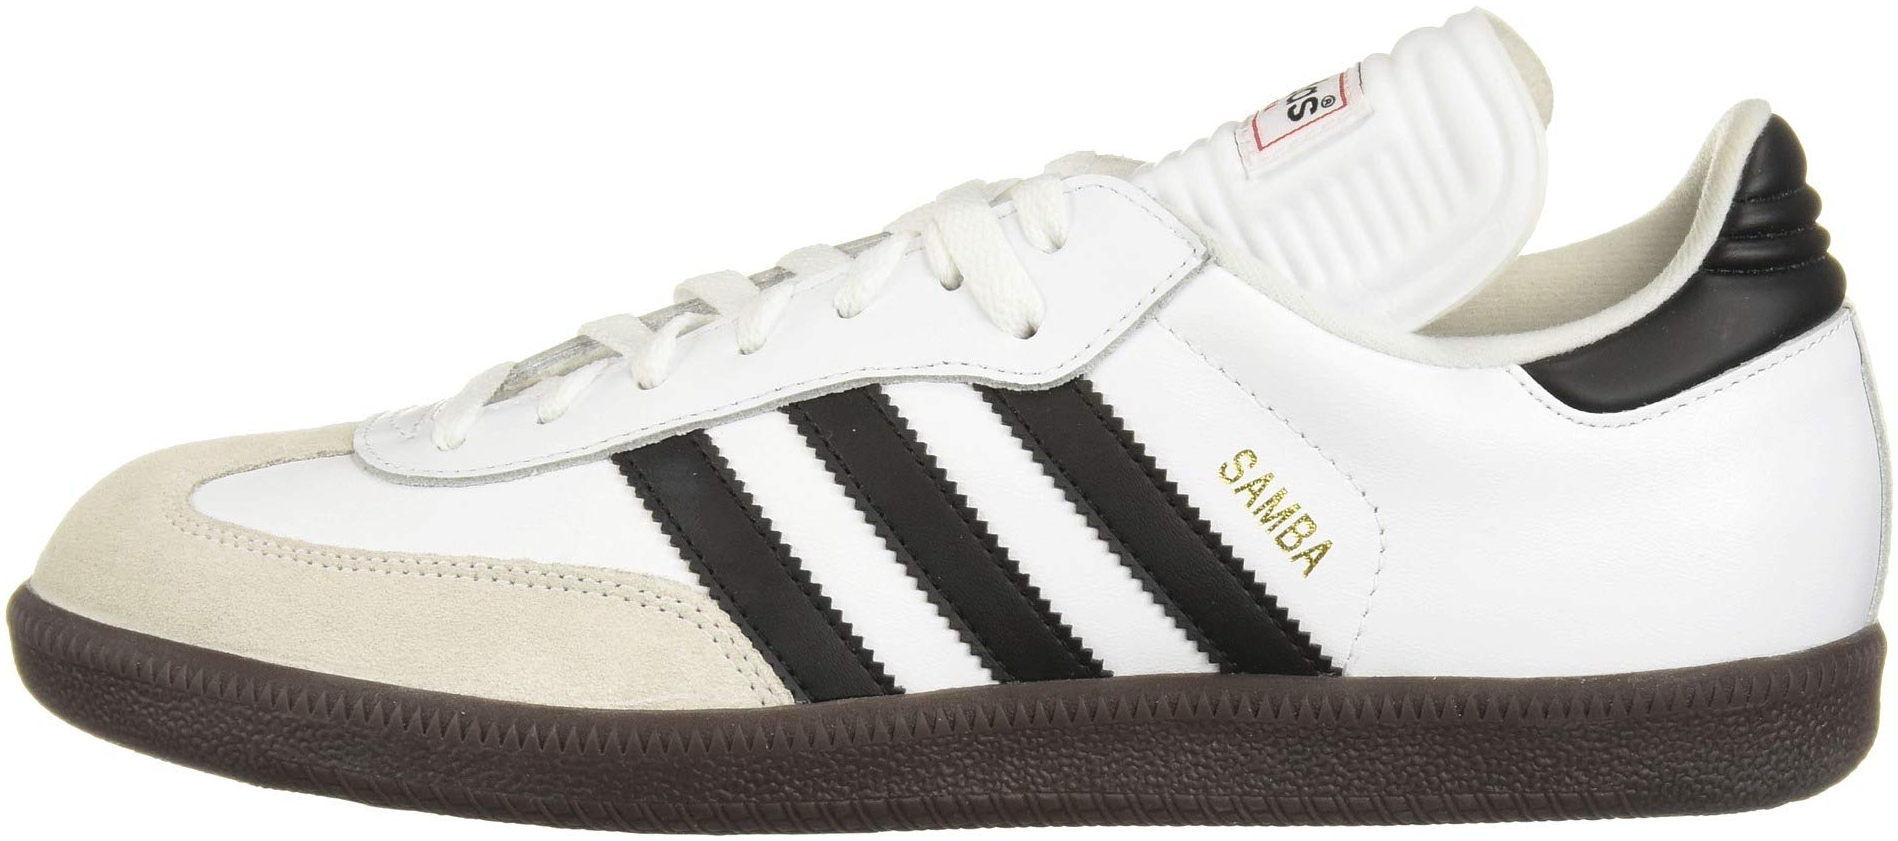 Marquee reality escape Adidas Samba OG sneakers (only $65) | RunRepeat